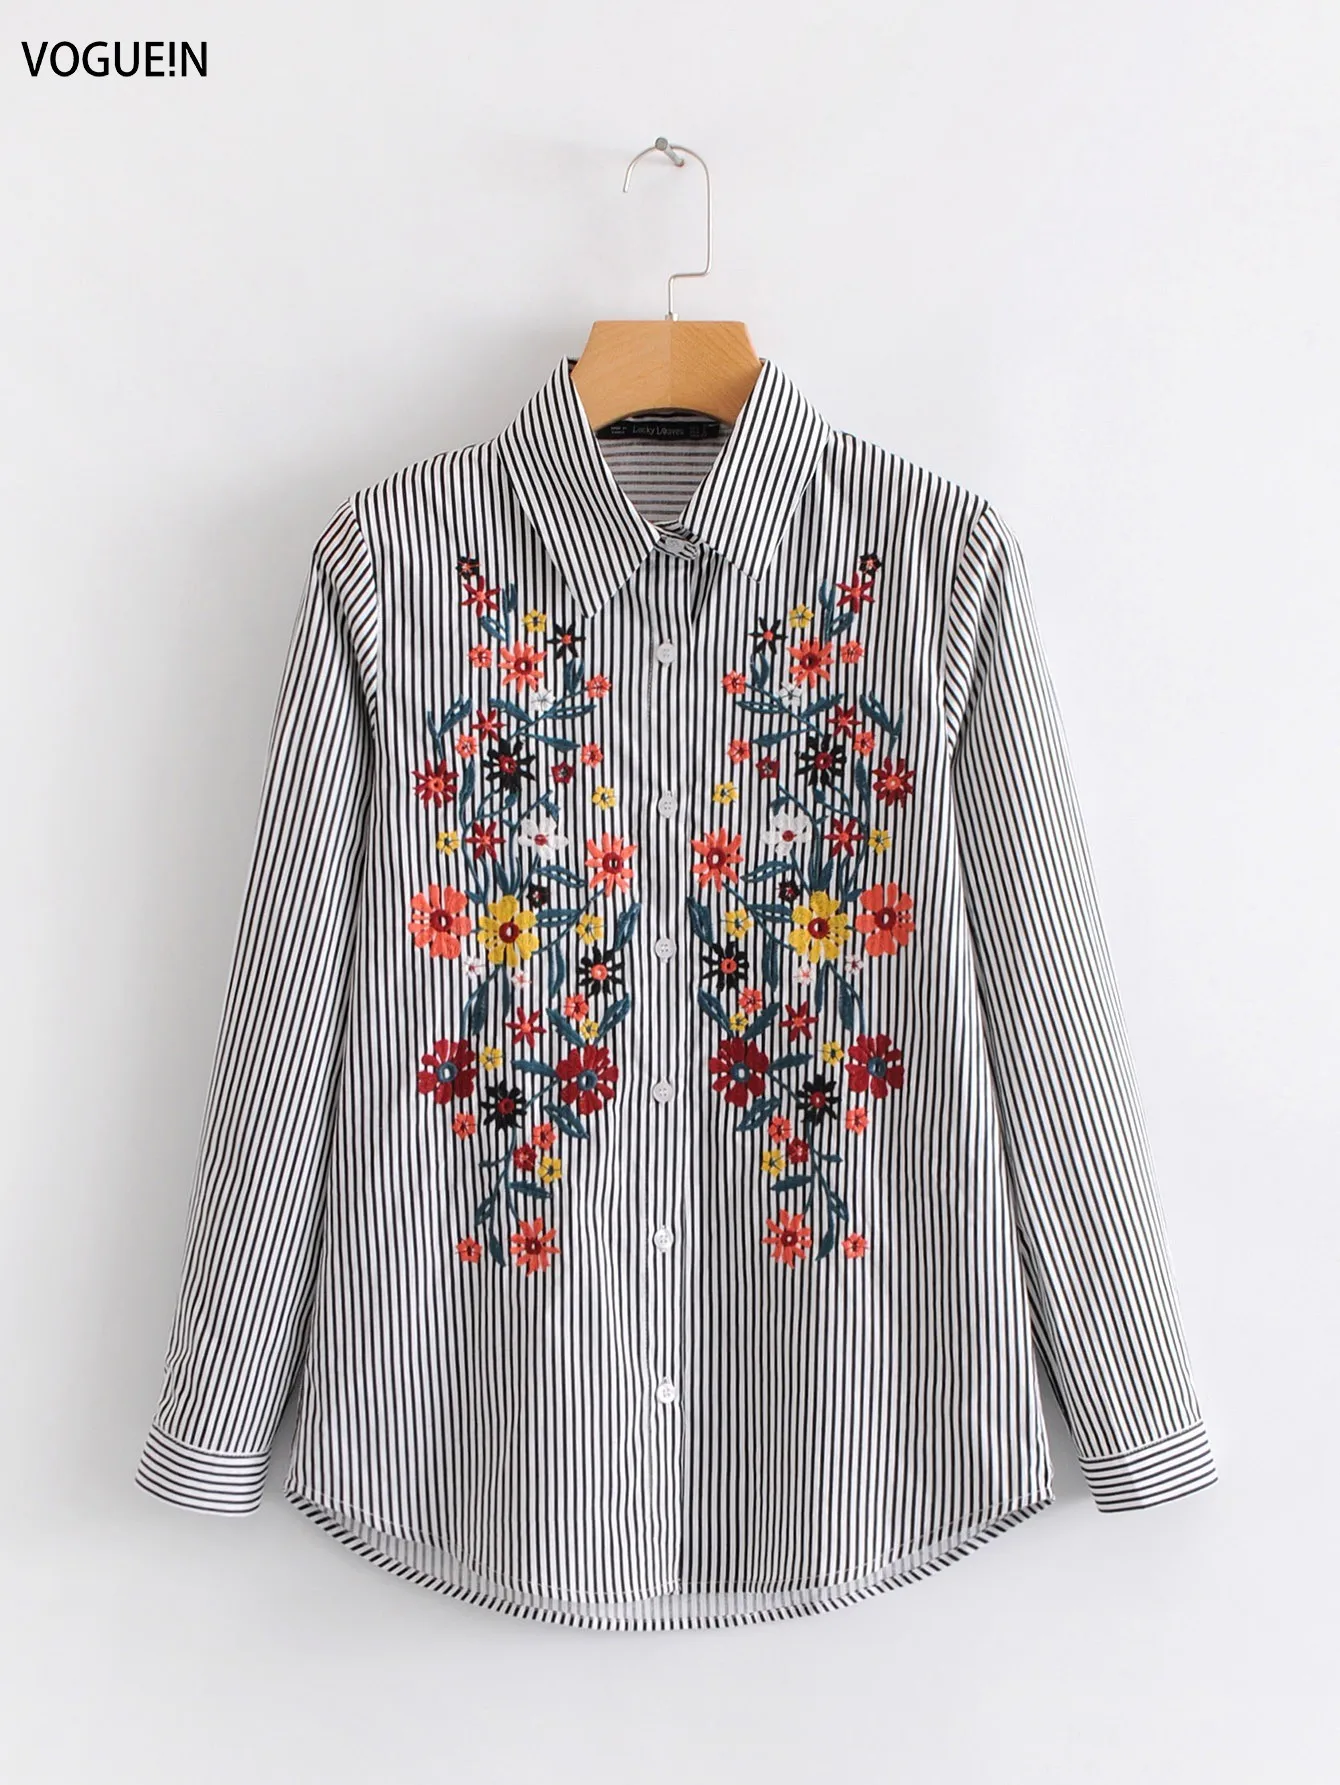 

VOGUEIN New Womens Black Striped Floral Embroidered Long Sleeve Shirt Blouse Tops Wholesale